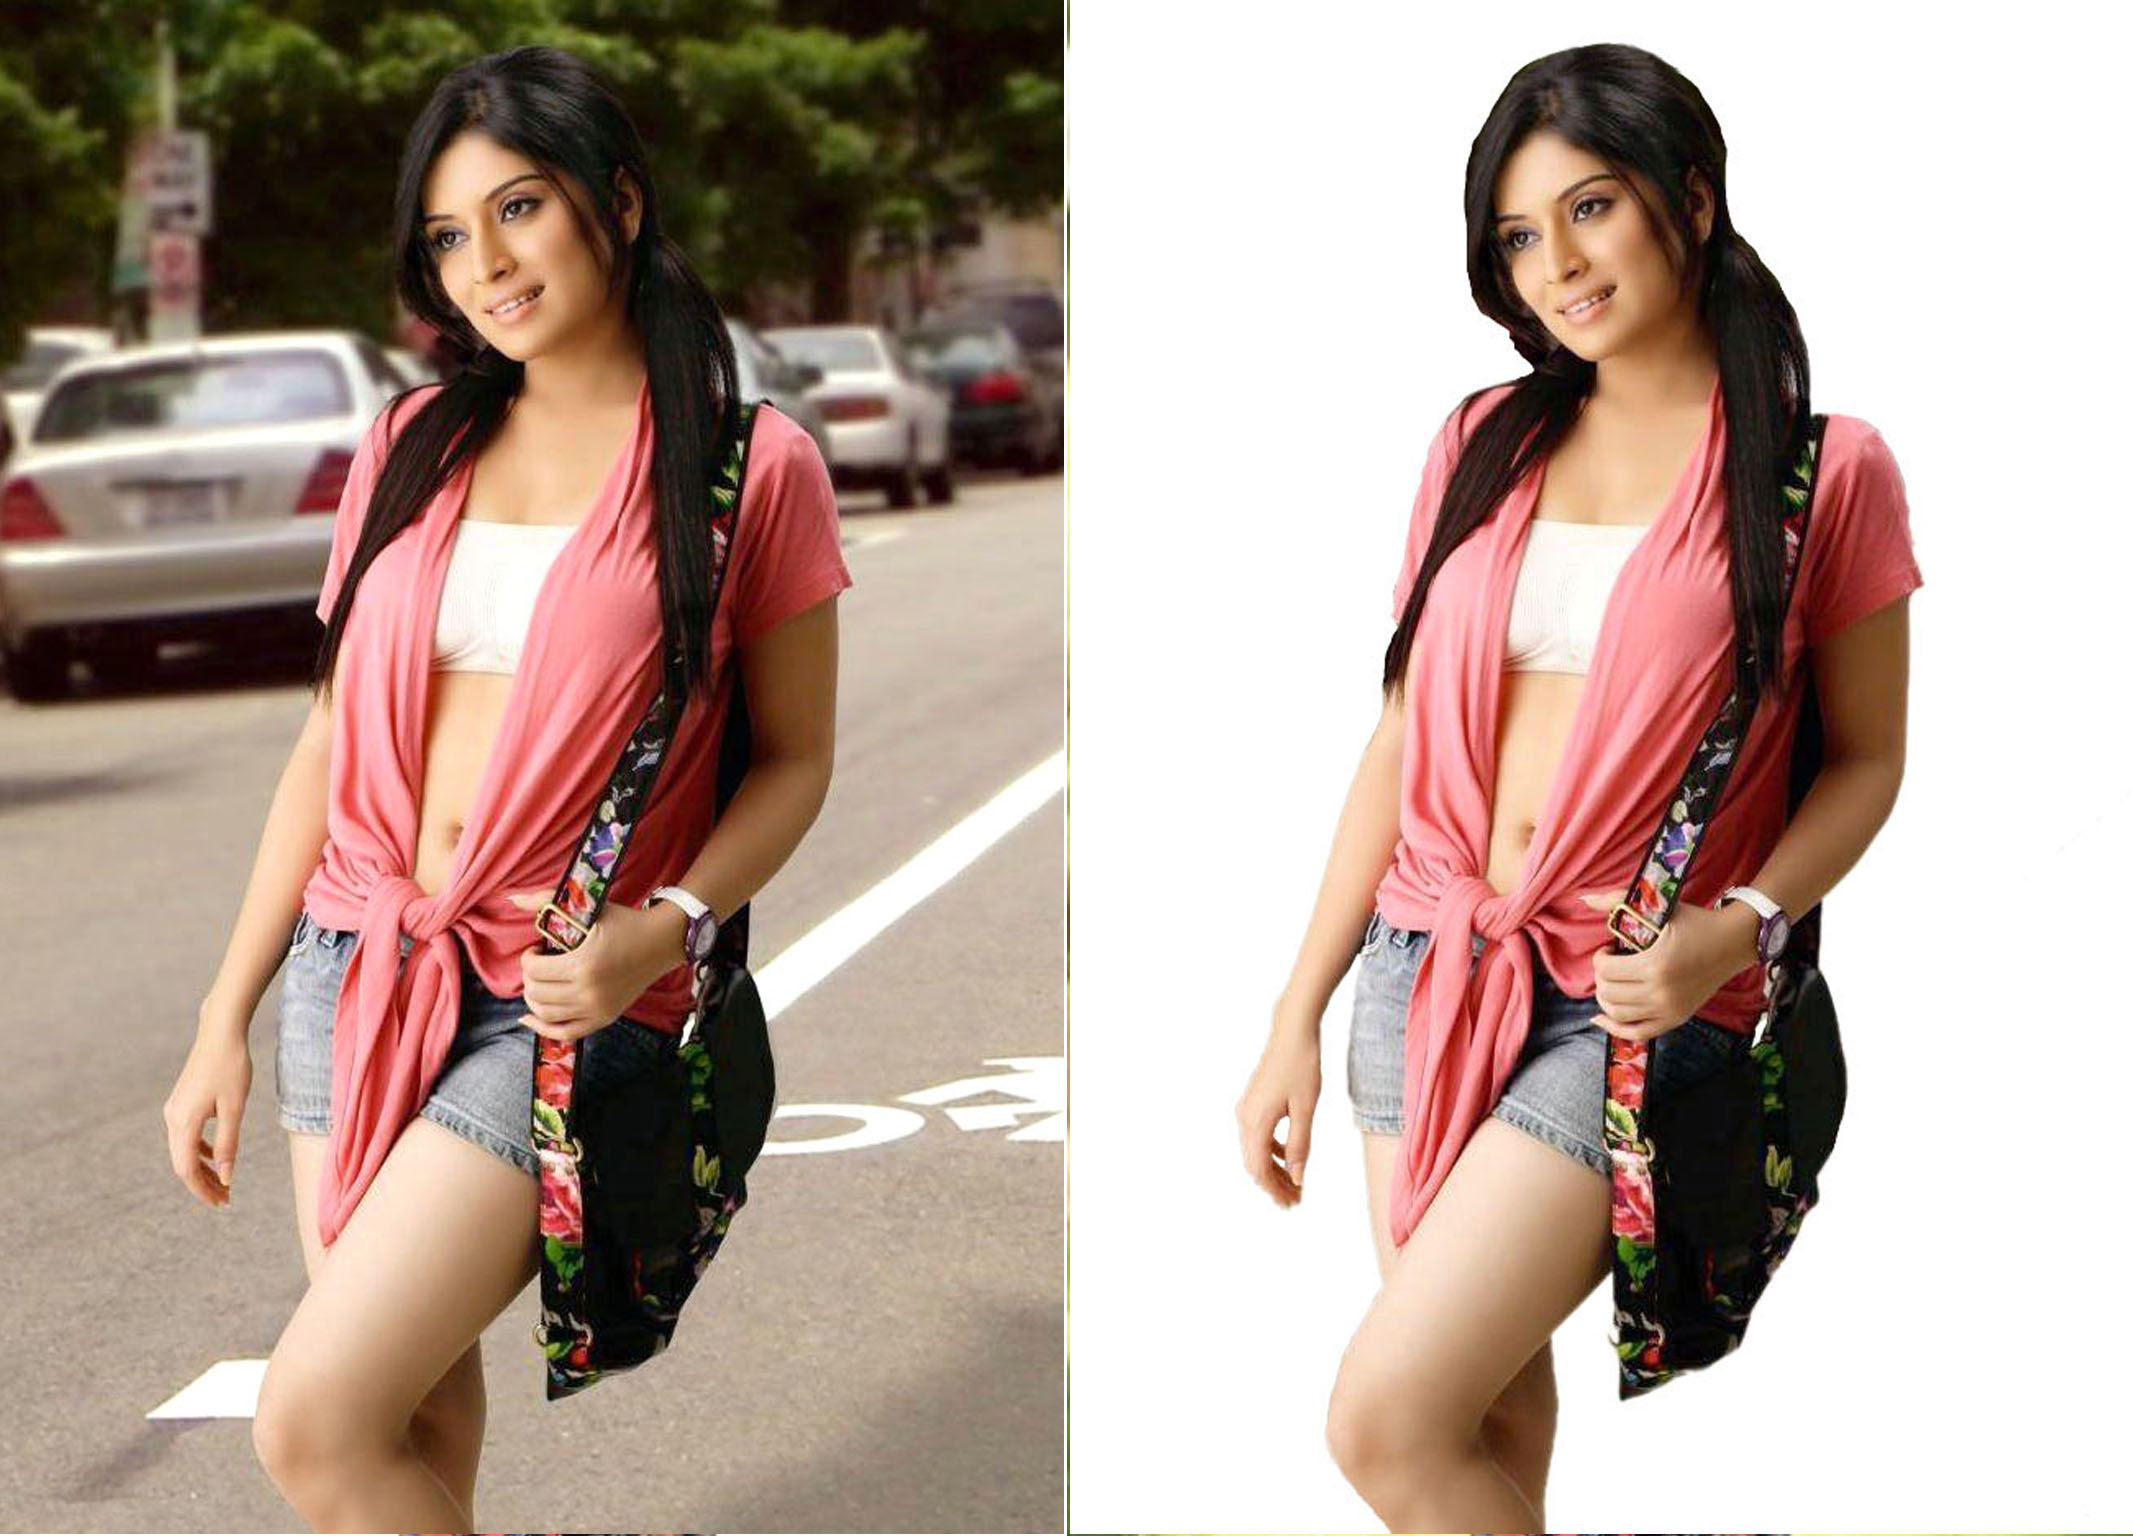 Fast Background removal of 1-10 photos. for $5 - SEOClerks